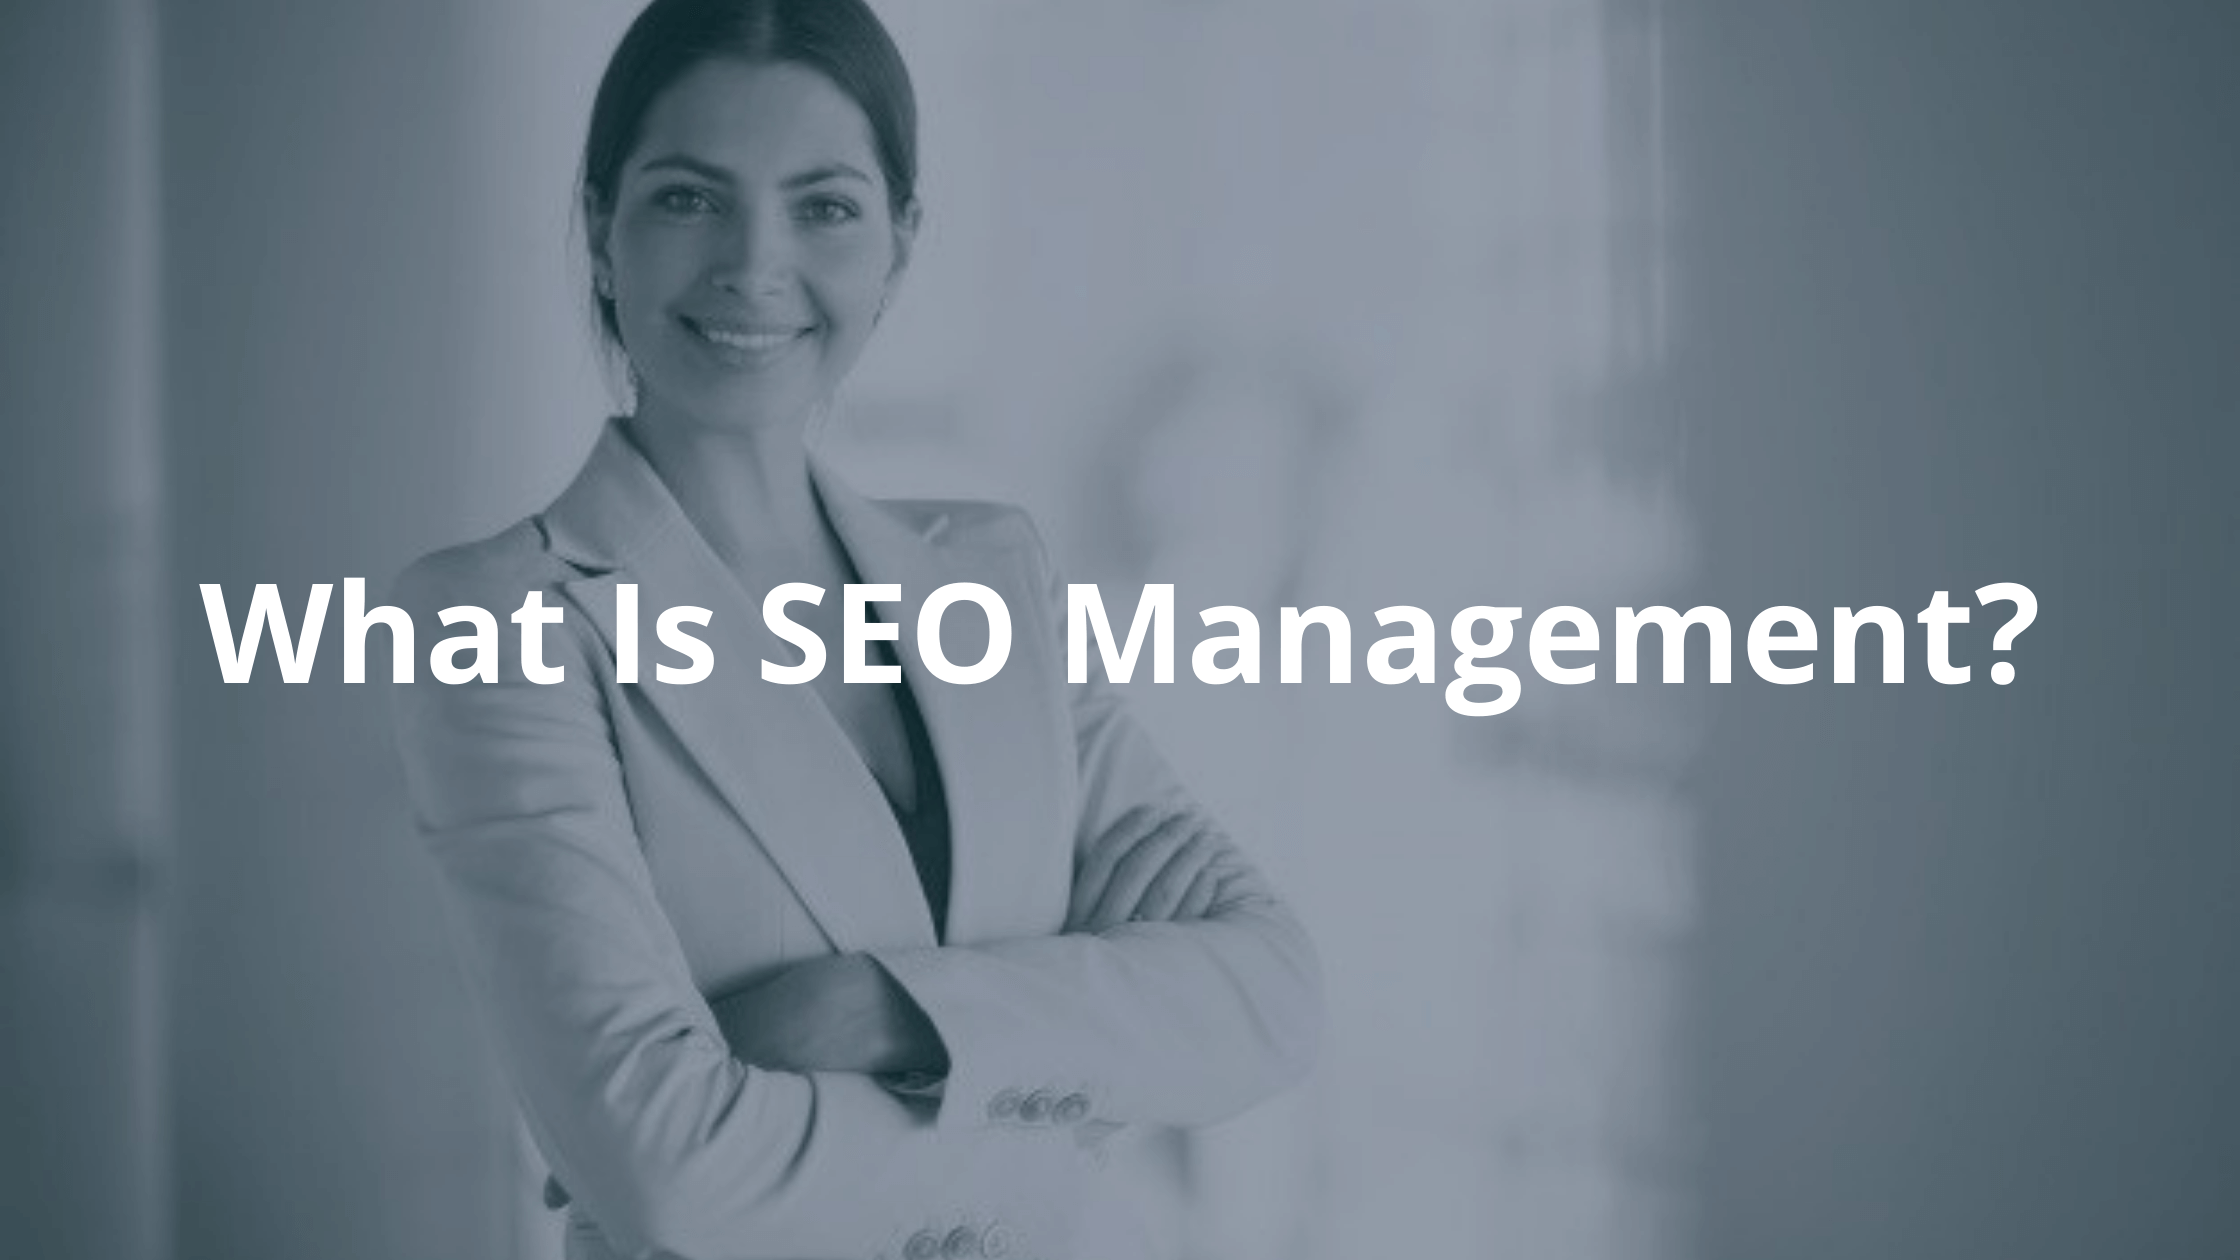 What Is SEO Management?